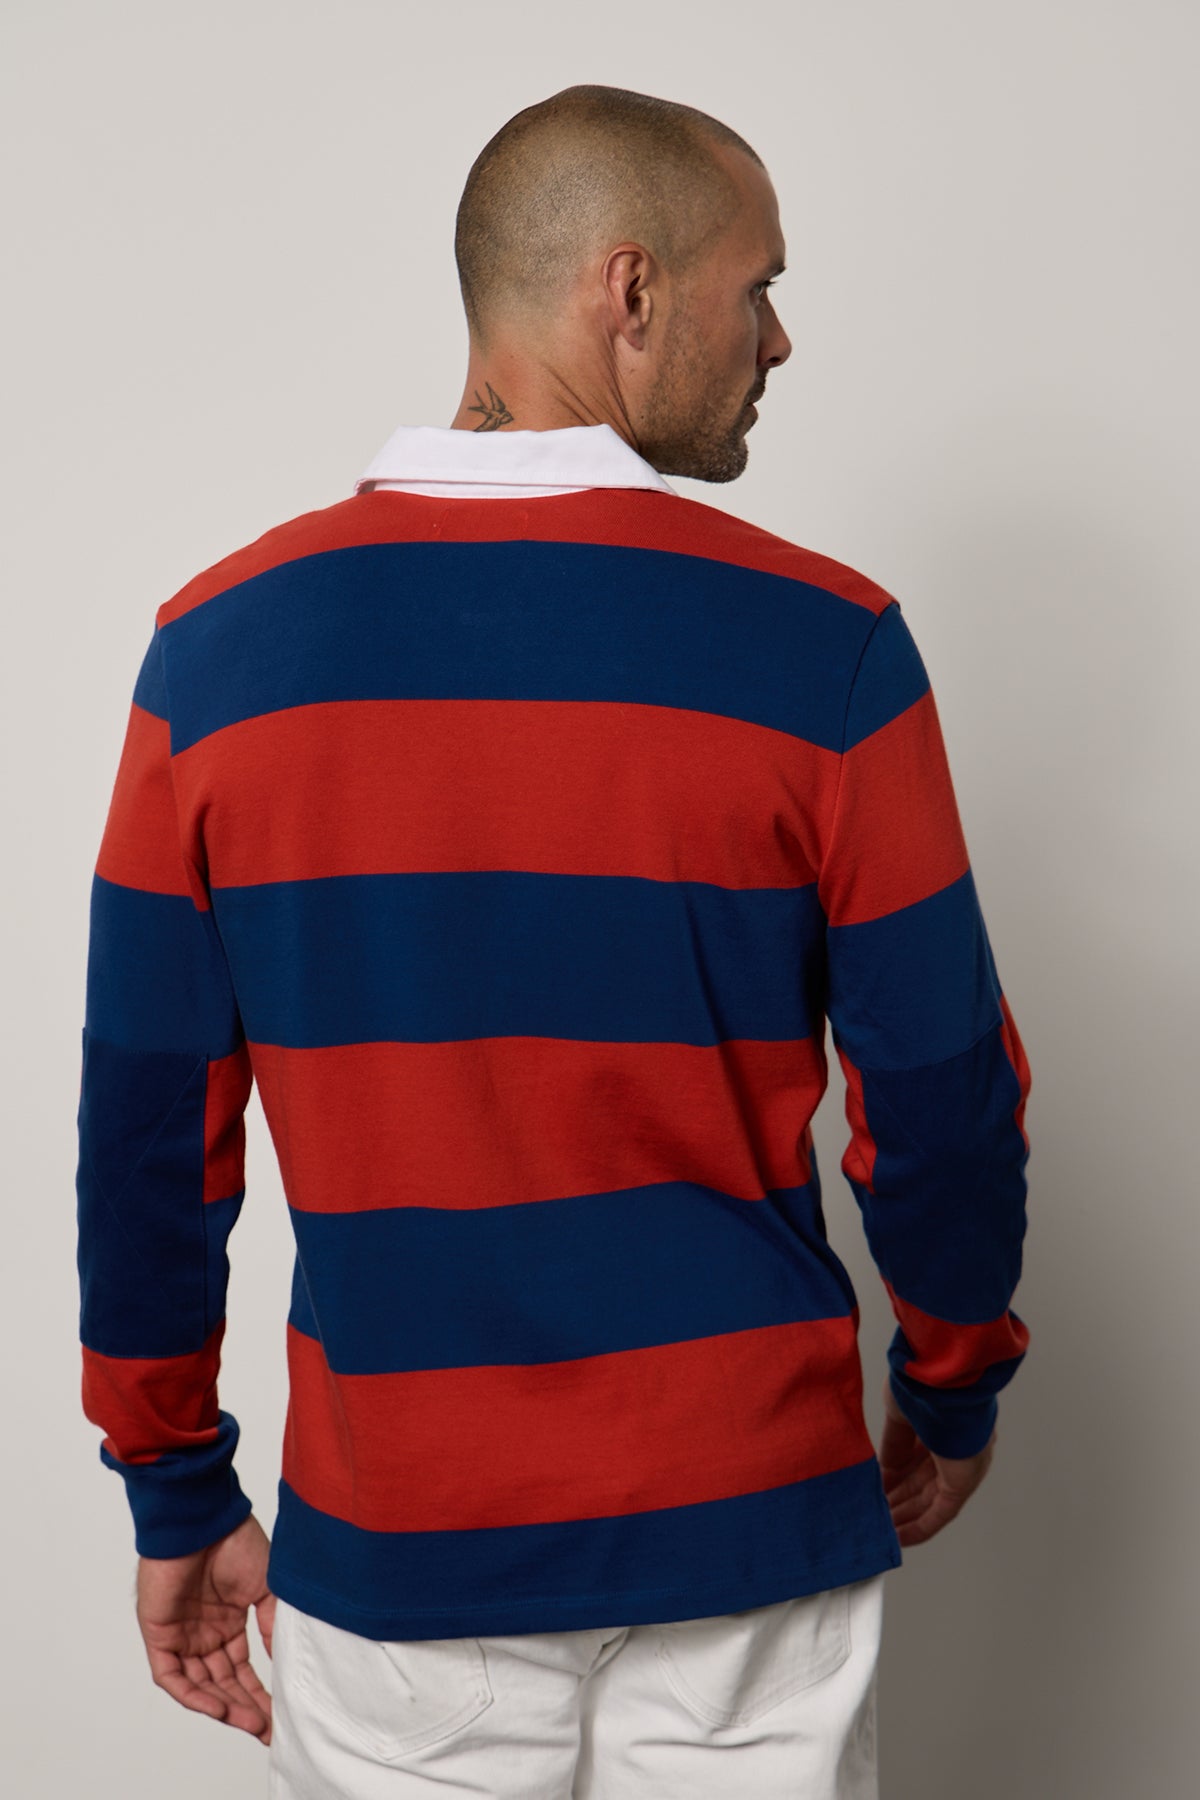   Pierre Rugby Stripe long sleeve polol with broad blue and red stripes and white collar with white denim back 